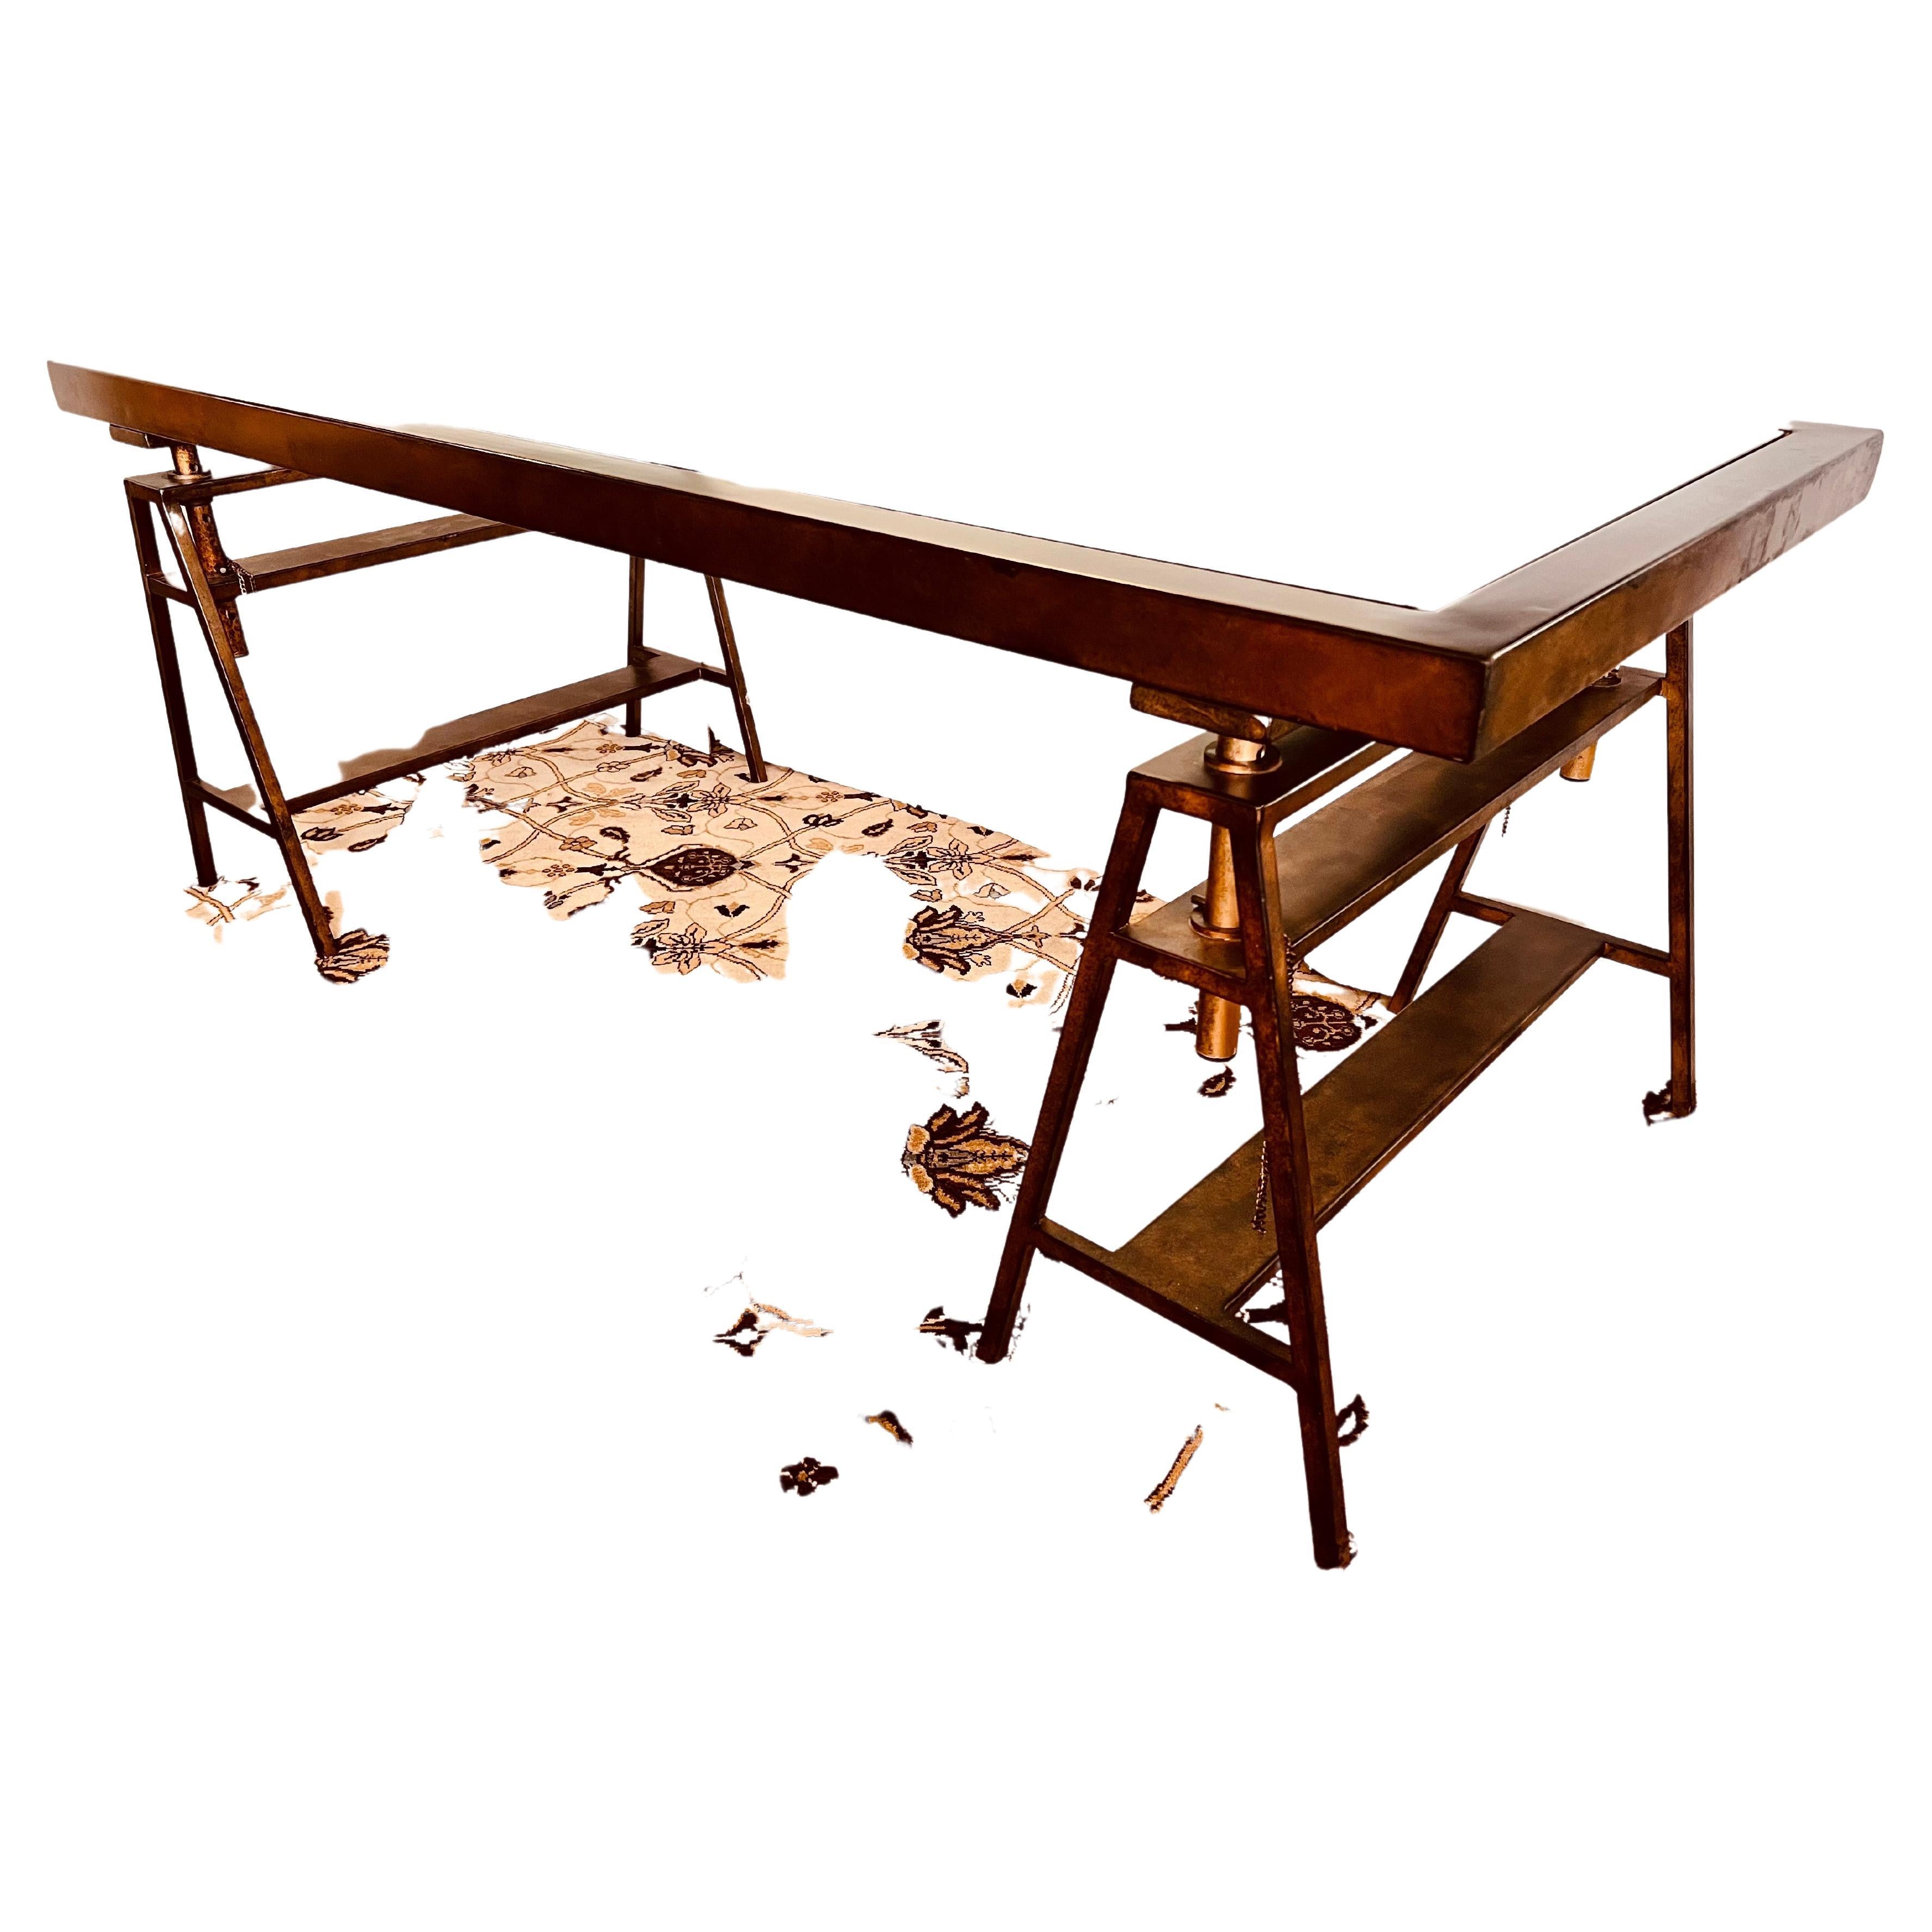 Fabulous saw horse style industrial age desk painted in bronze finish. Content is metal and glass and this is a great, iconic mid century style desk. Note the height is adjustable which is ingenious. Own the best.